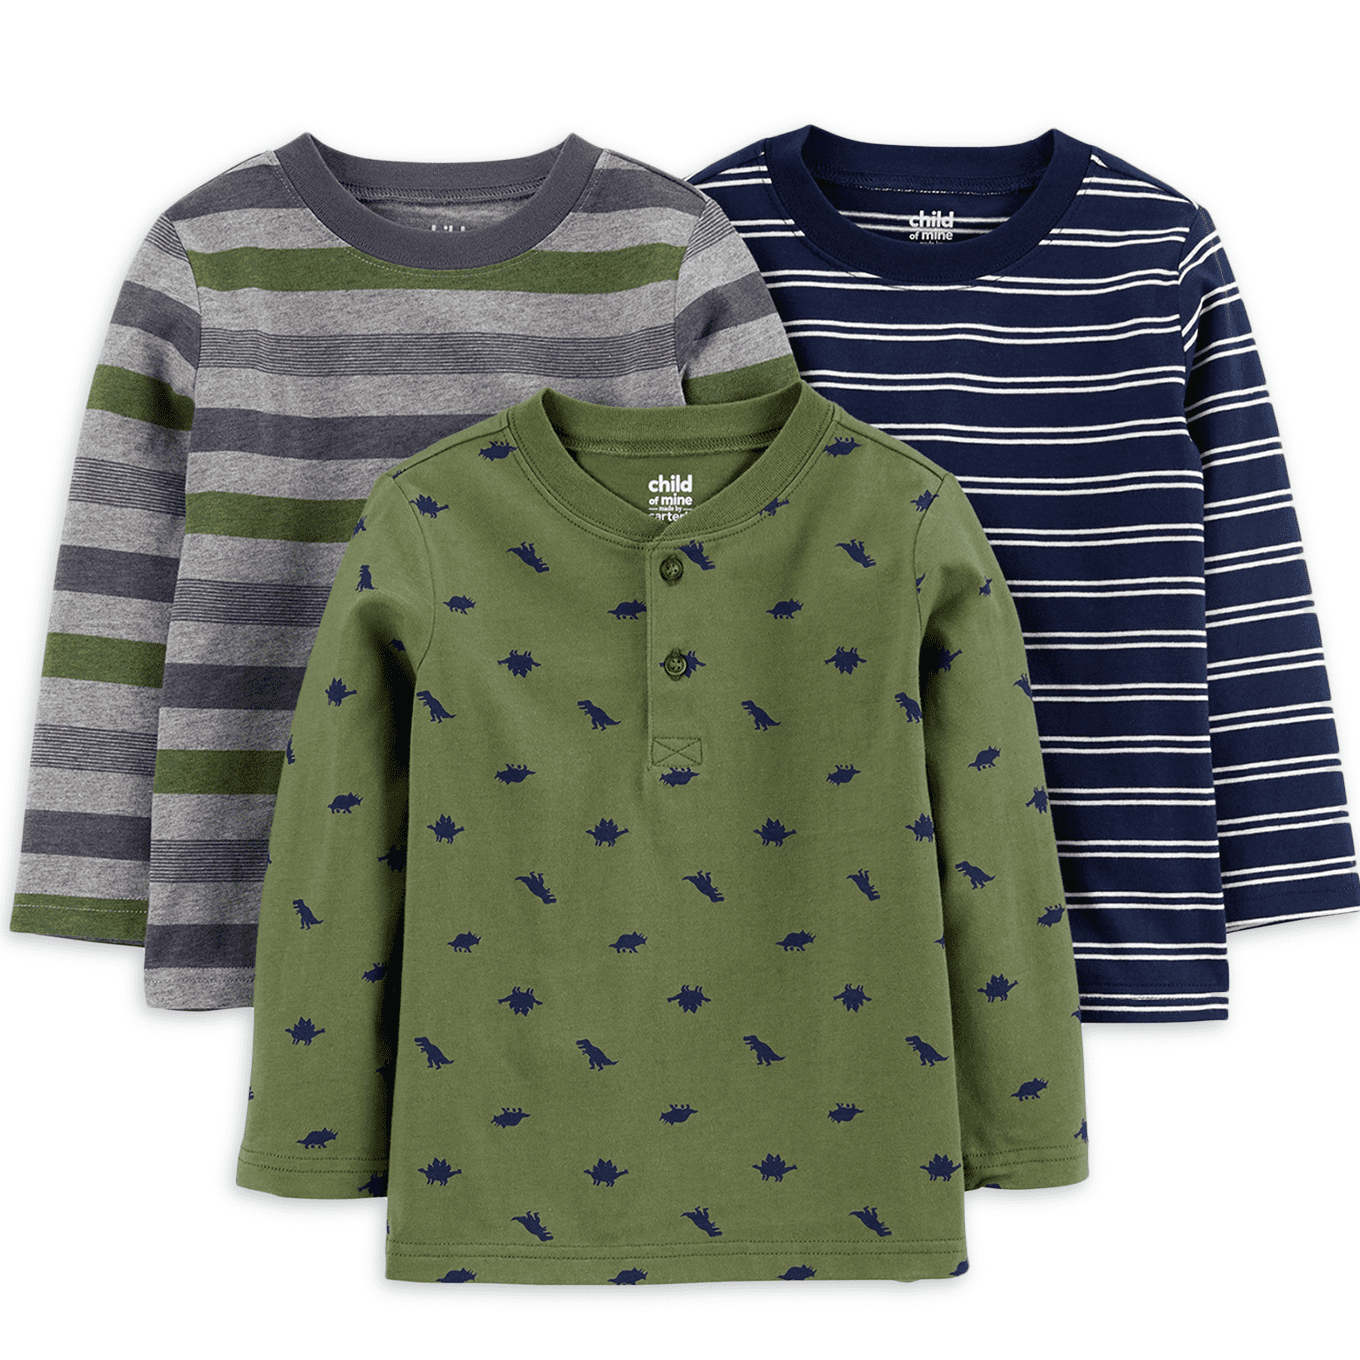 Carter's Boys' Layered Look Long Sleeve T-Shirt Select a size/color 